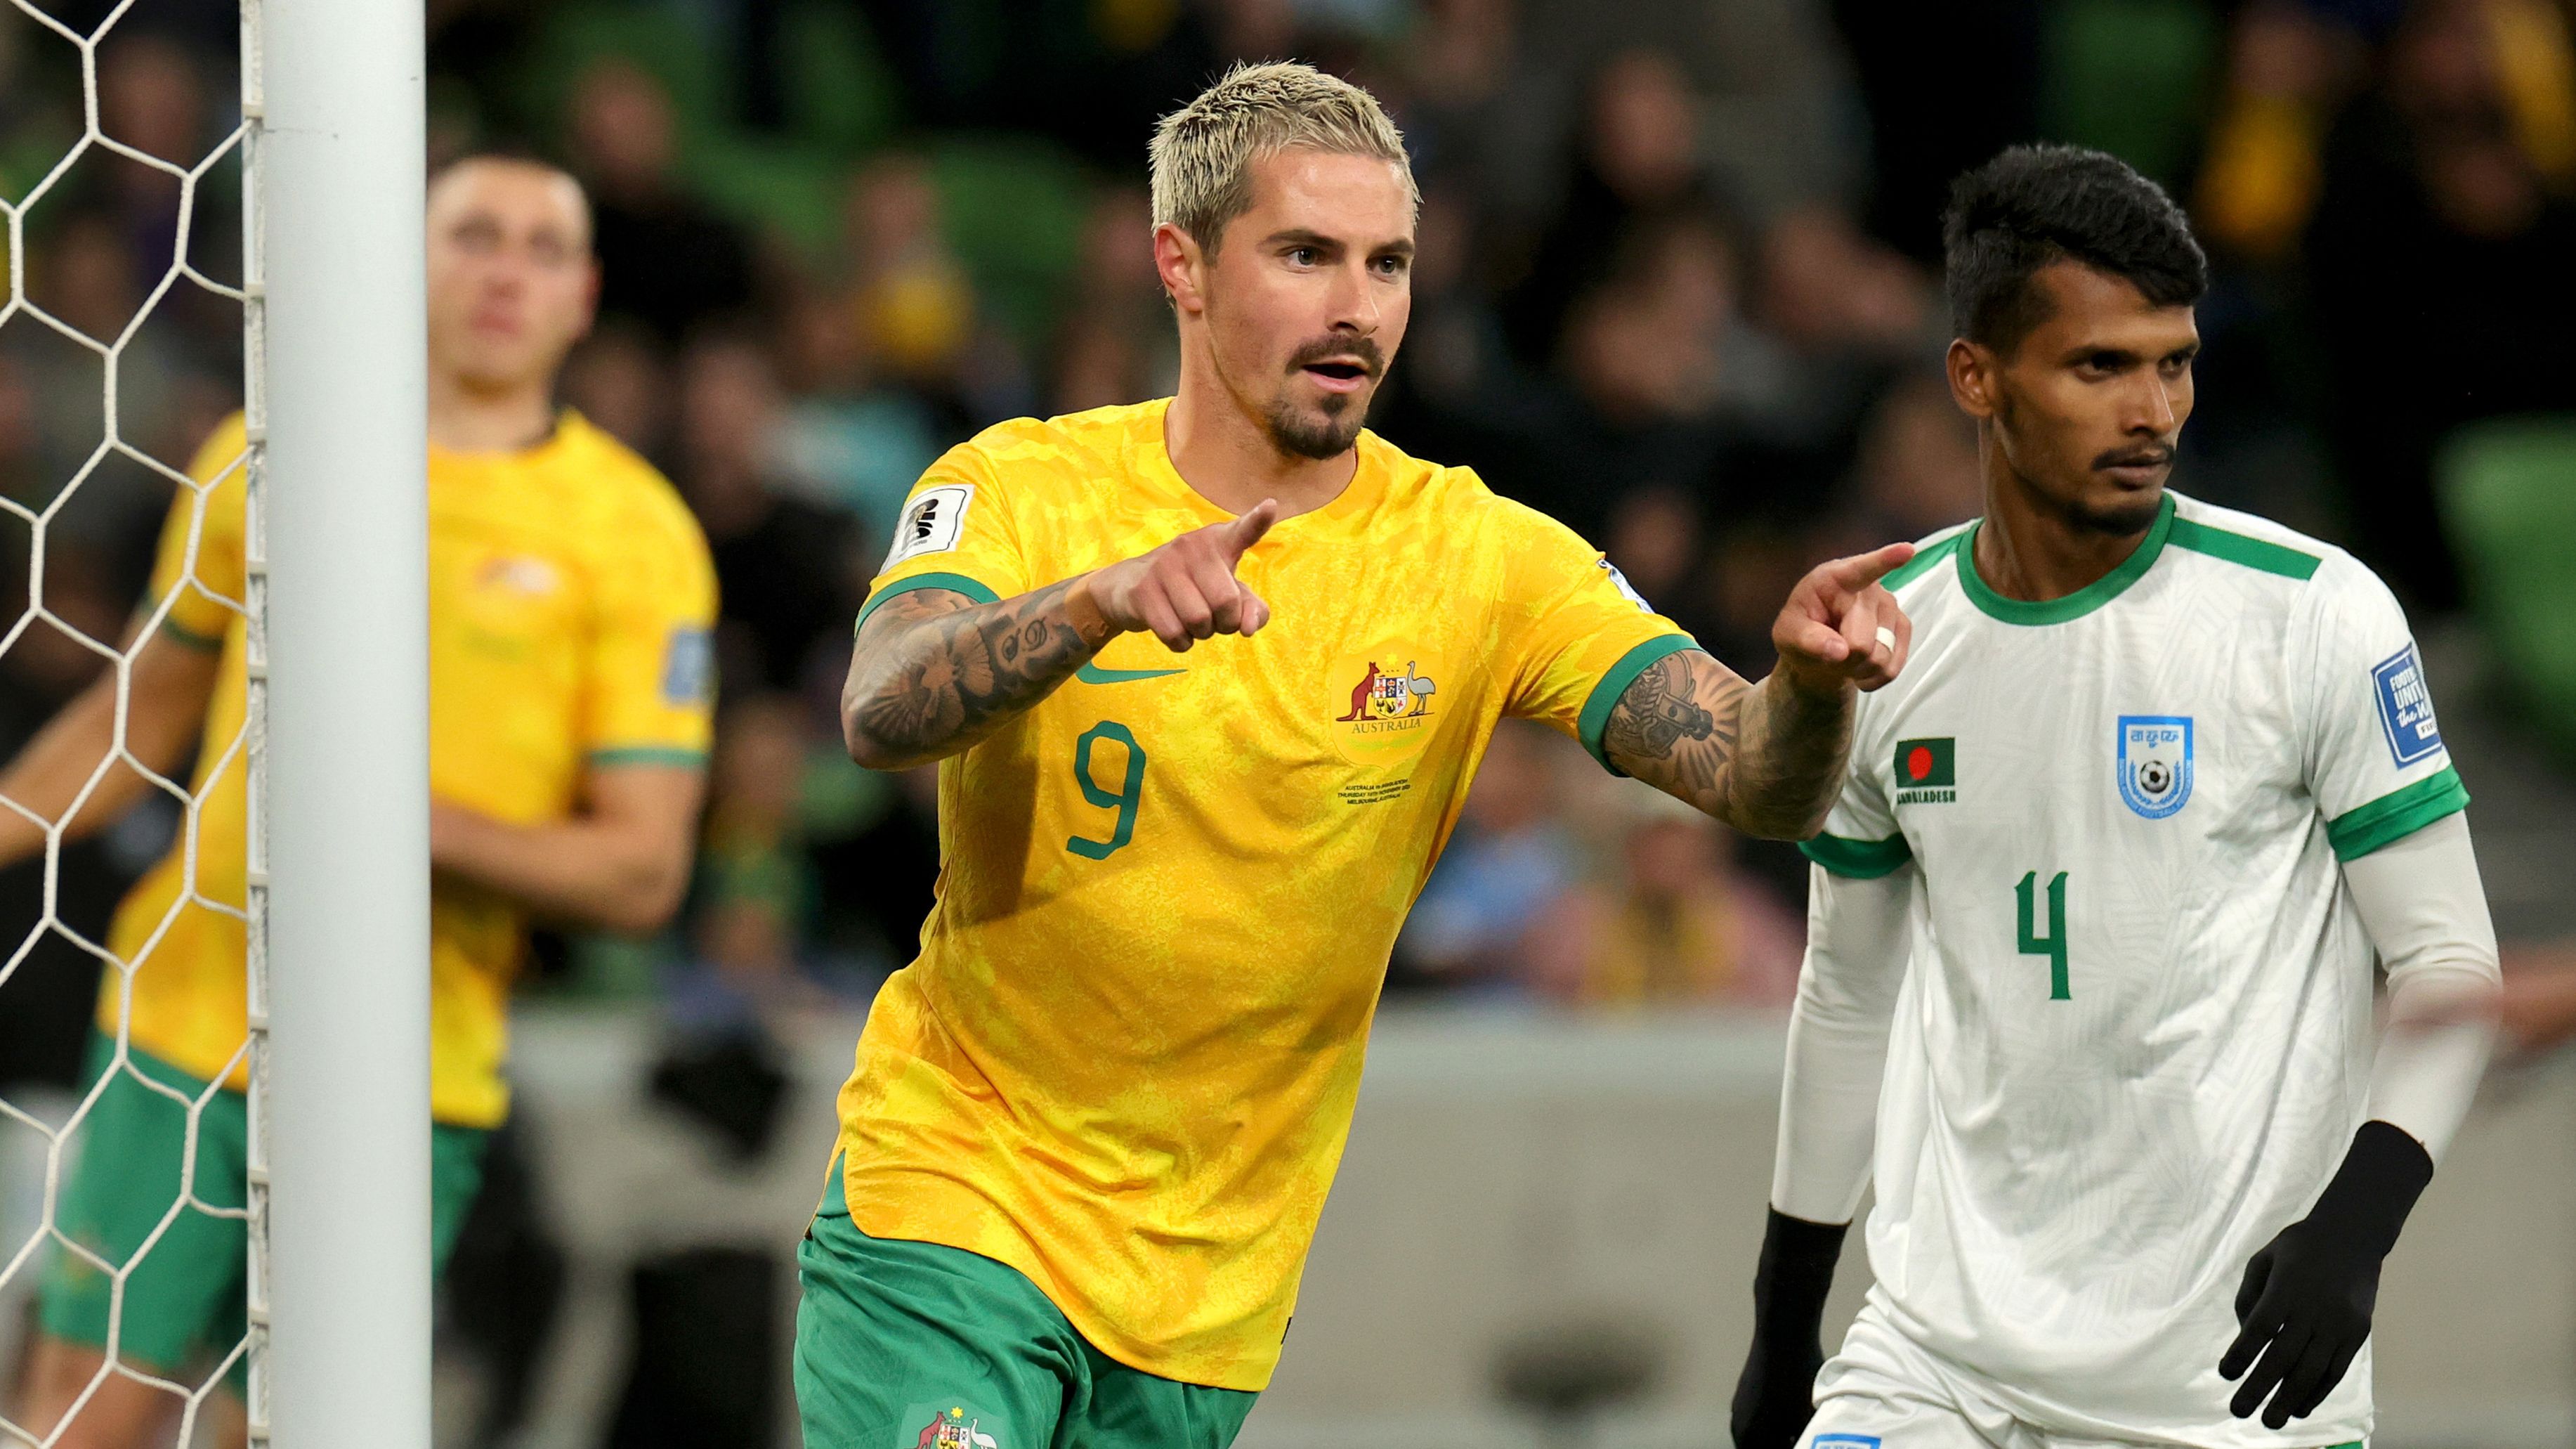 MELBOURNE, AUSTRALIA - NOVEMBER 16: Jamie Maclaren of the Socceroos celebrates scoring a goal during the 2026 FIFA World Cup Qualifier match between Australia Socceroos and Bangladesh at AAMI Park on November 16, 2023 in Melbourne, Australia. (Photo by Kelly Defina/Getty Images)